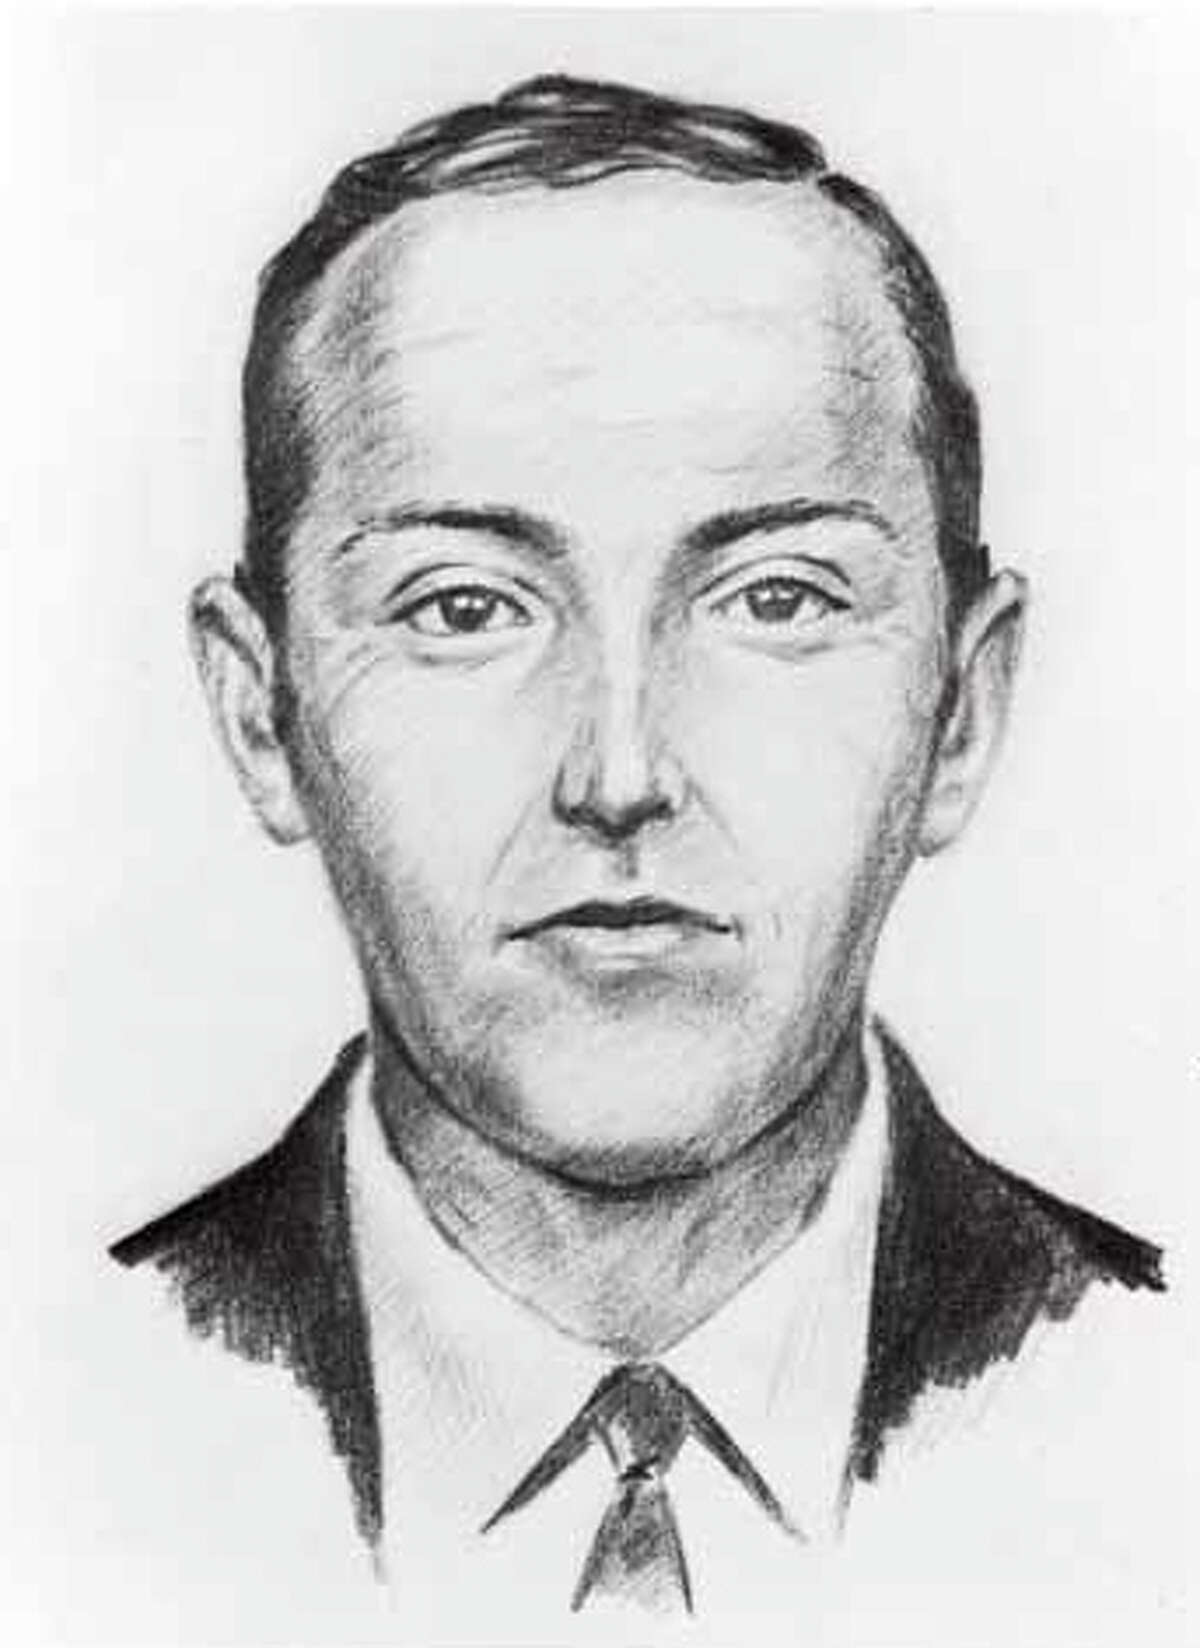 Digital photograph showing an artist conceptual sketch of "Dan Cooper" aka DB Cooper, who hijacked Northwest Orient Airlines flight 305 on November 24, 1971. Black and white drawing shows a white male with short hair, wearing a suit and necktie.